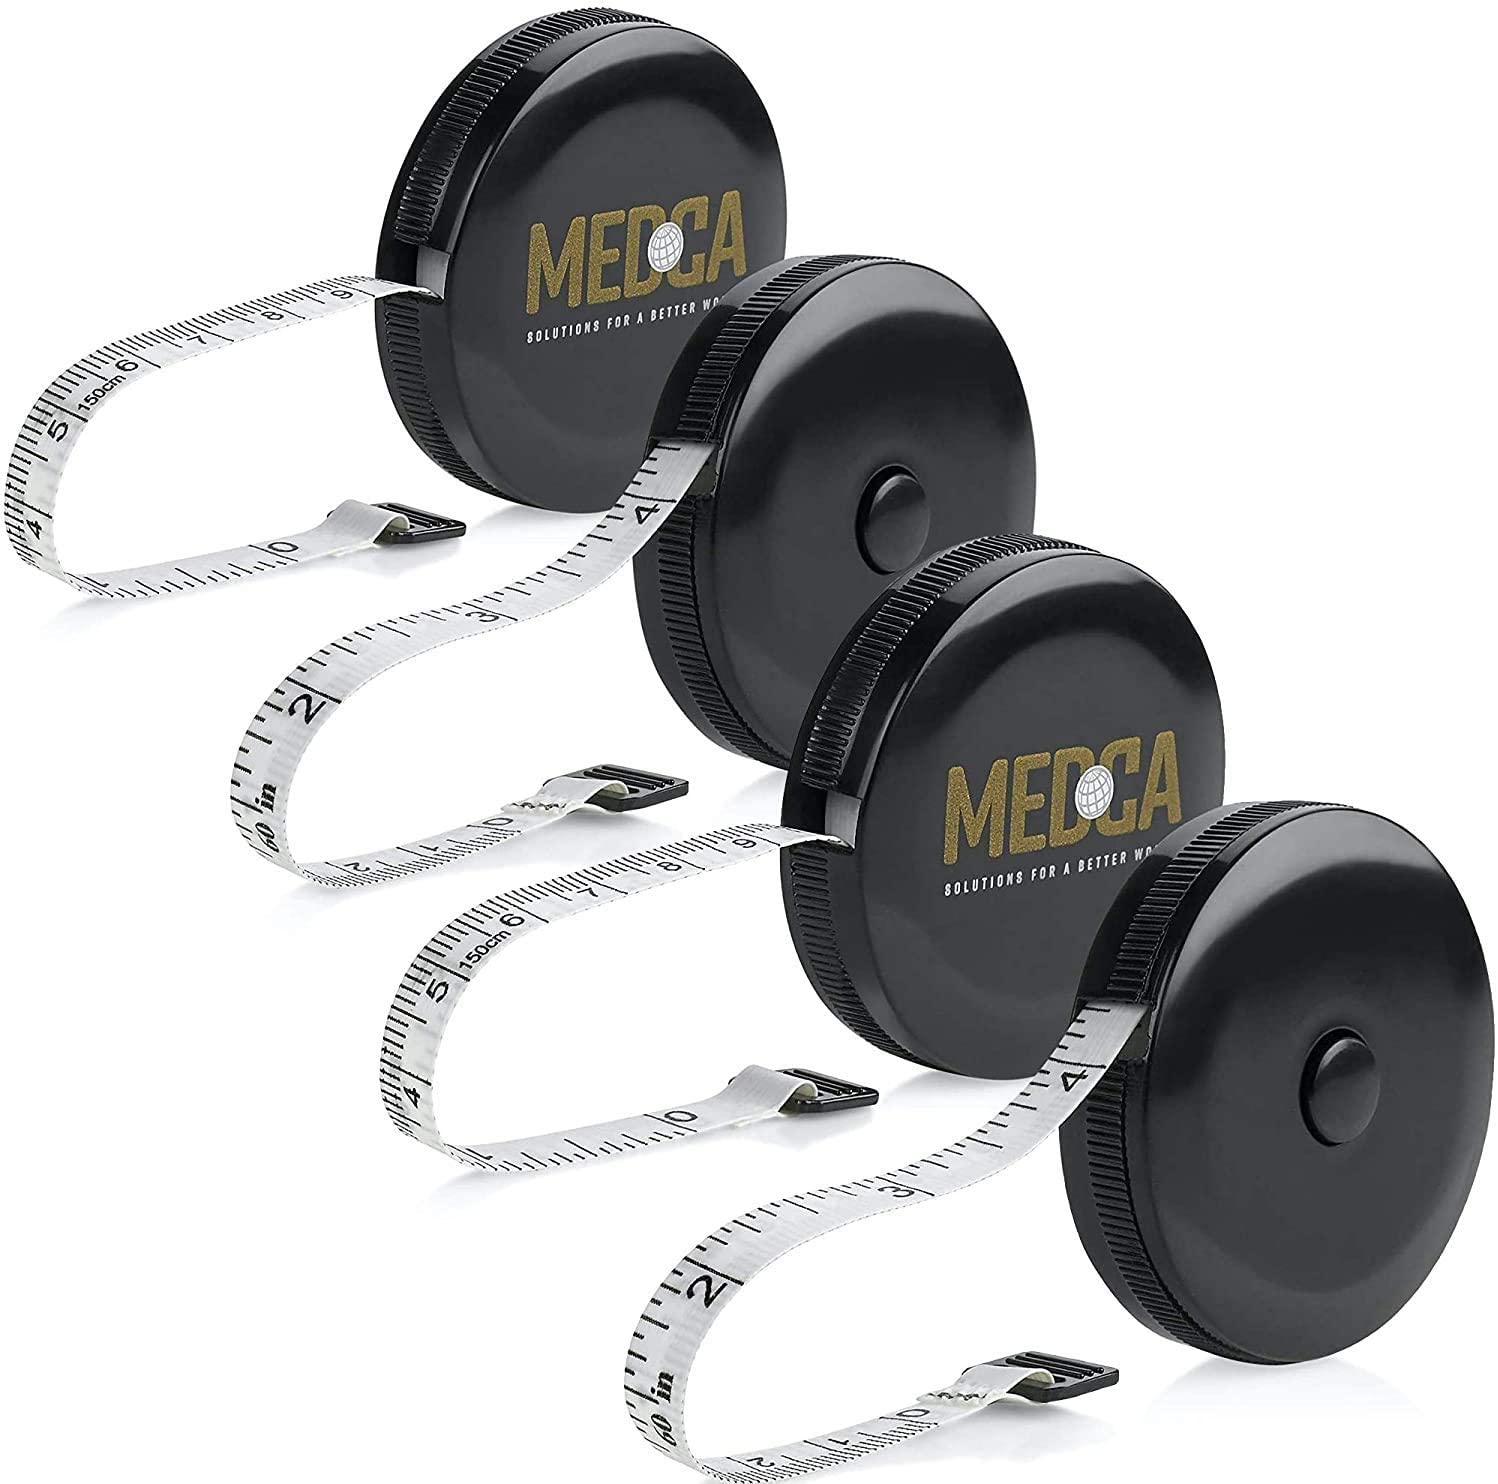 https://carismedic.com/wp-content/uploads/imported/Tape-Measure-for-Body-Measuring-Tape-Pack-of-4-Dual-Sided-Inch-and-cm-Portable-Retractable-Soft-Ruler-Tool-for-Mea-B08DJCGW9W.jpg